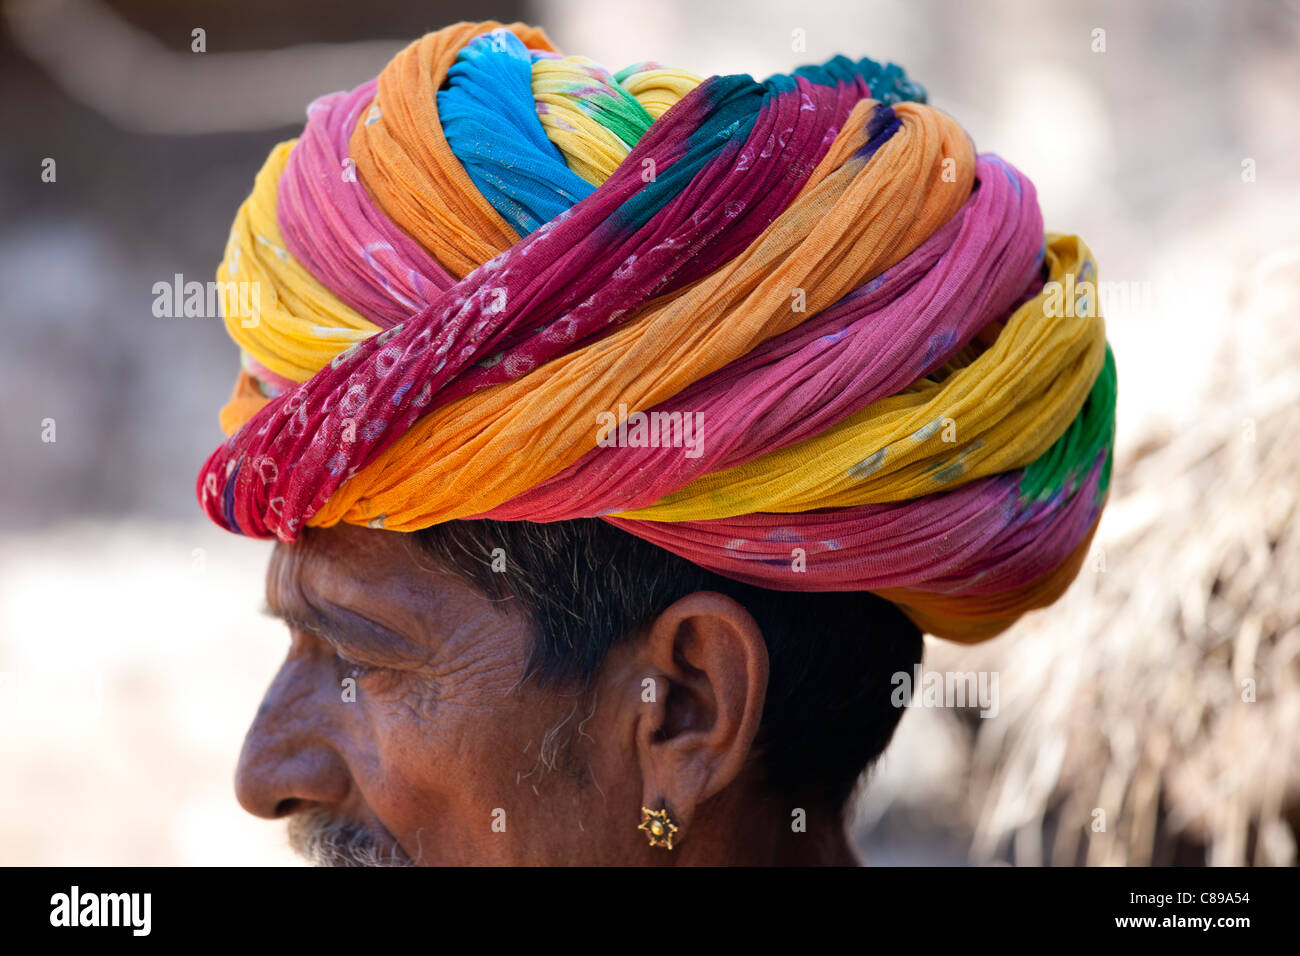 Indian man wearing traditional Rajasthani turban and gold earring in village of Nimaj, Rajasthan, Northern India Stock Photo